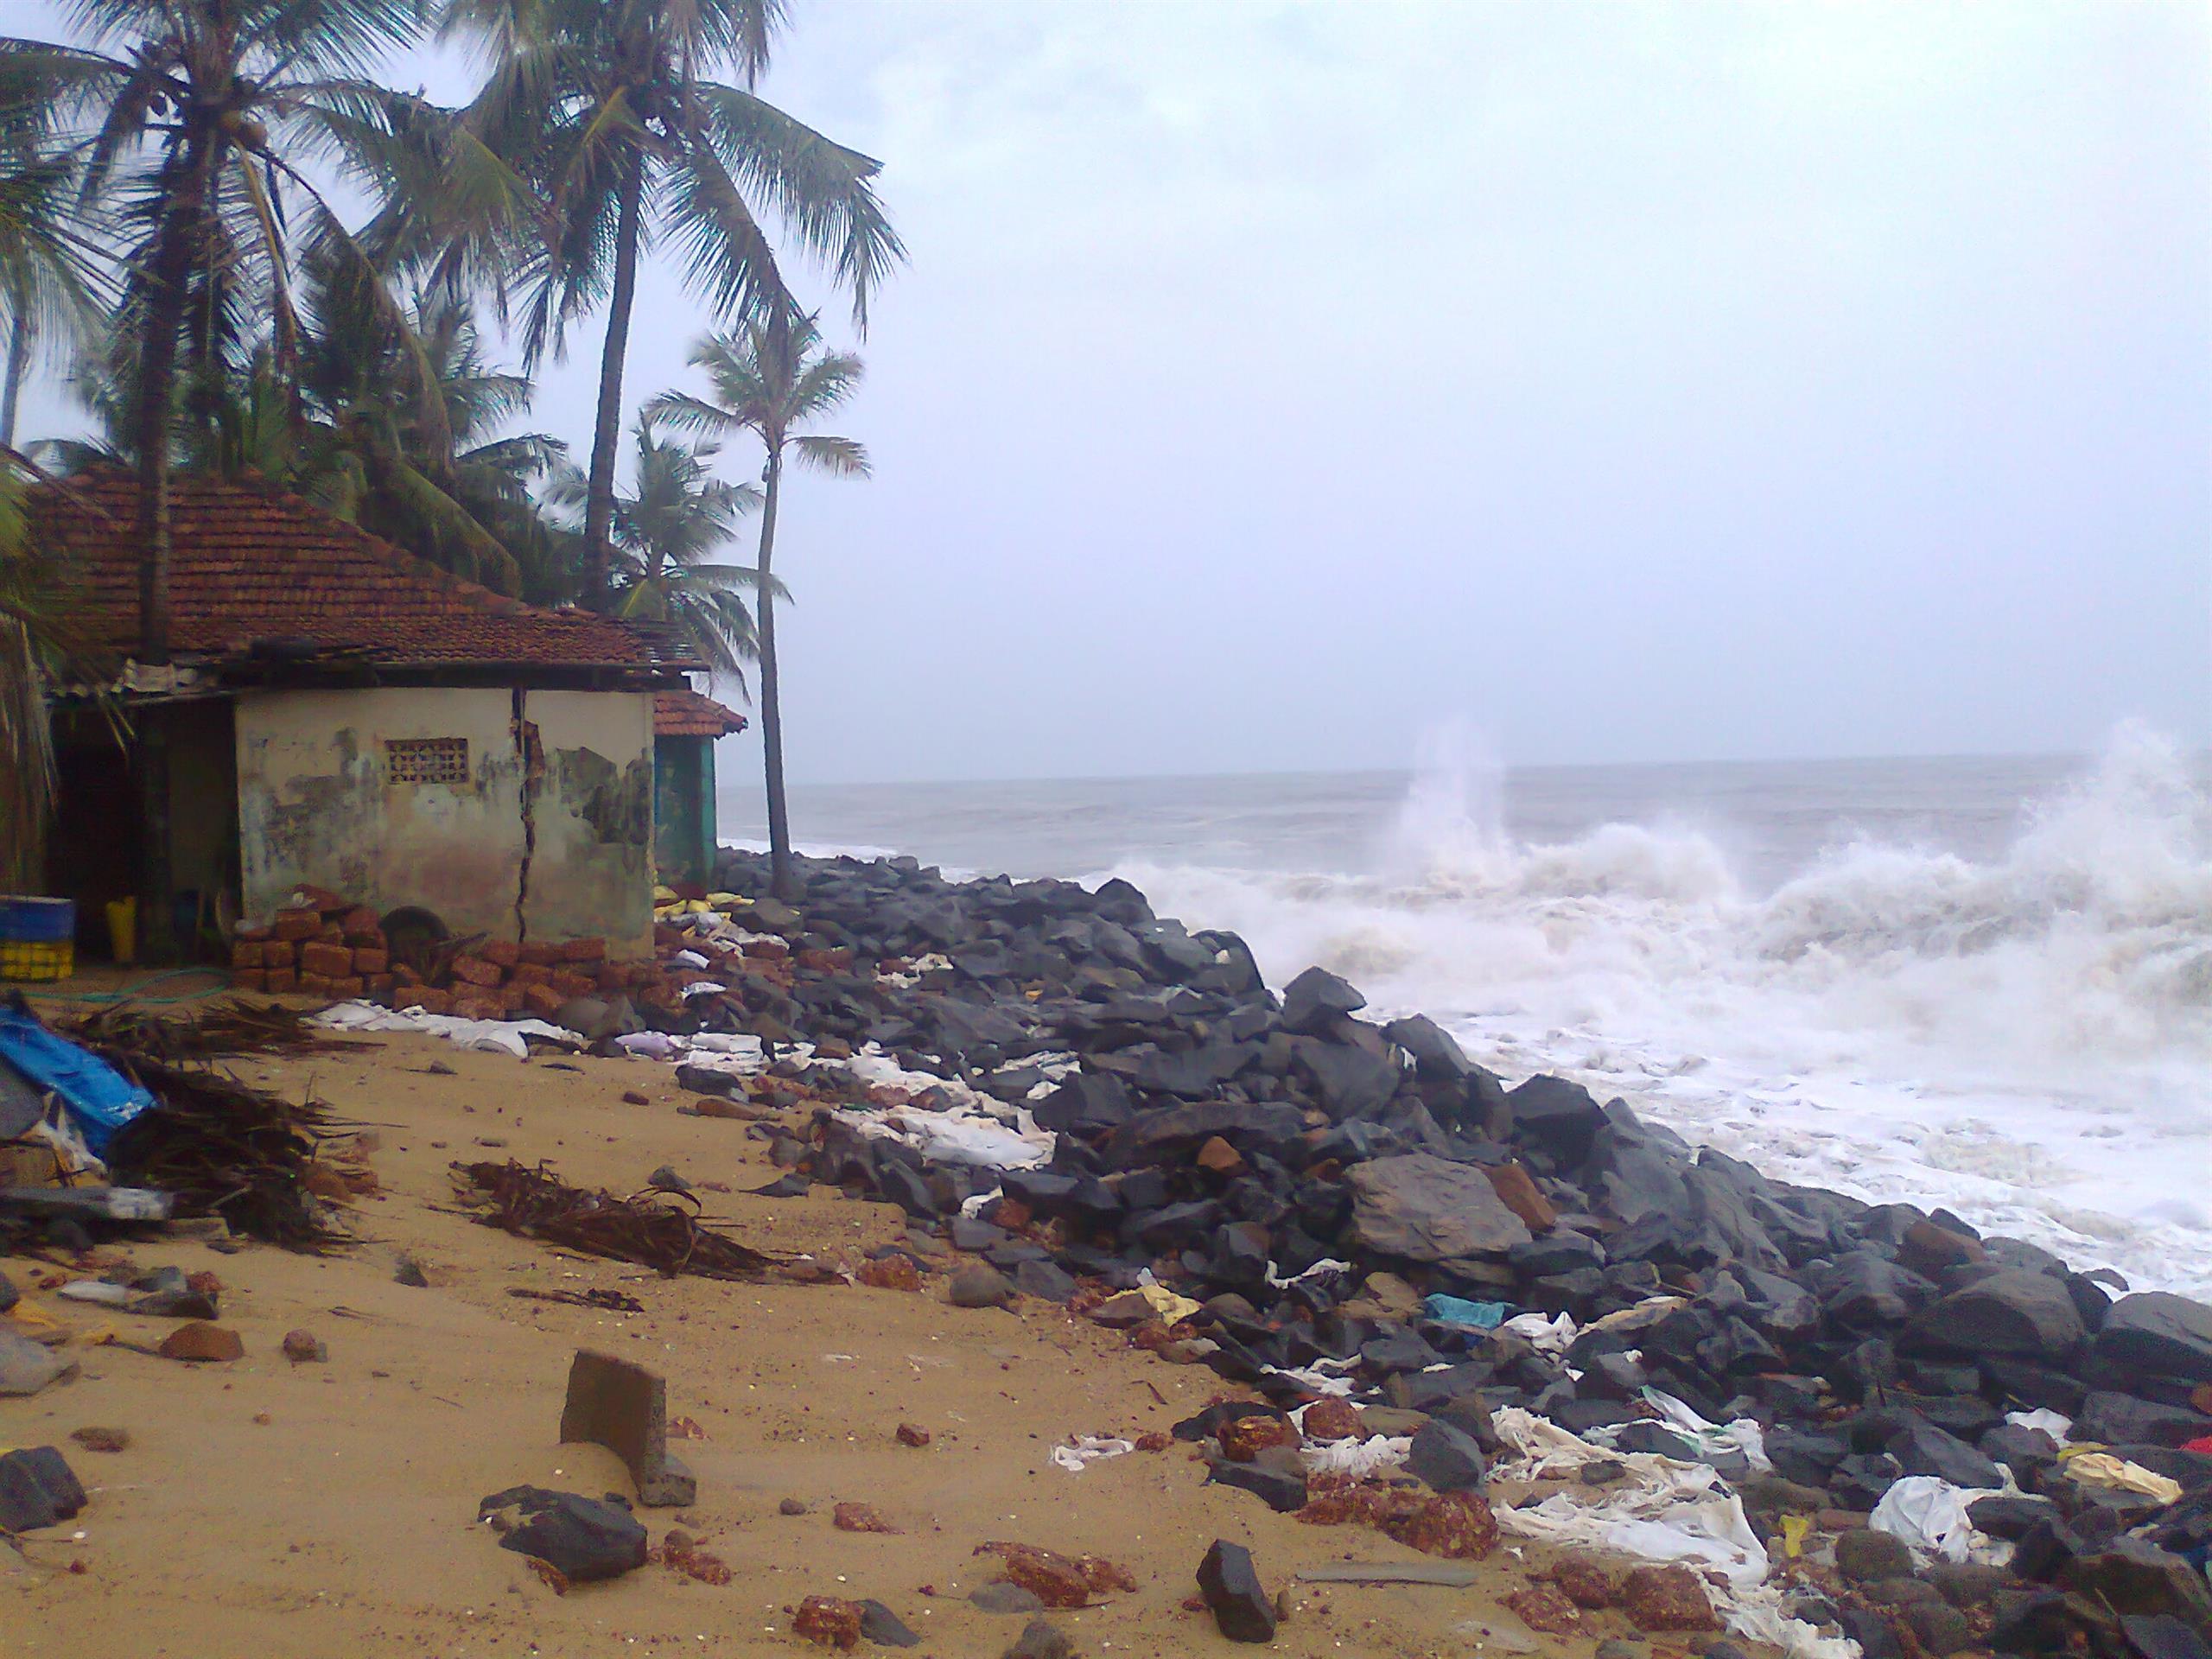 Rising sea levels and the threat of coastal erosion to low-lying areas